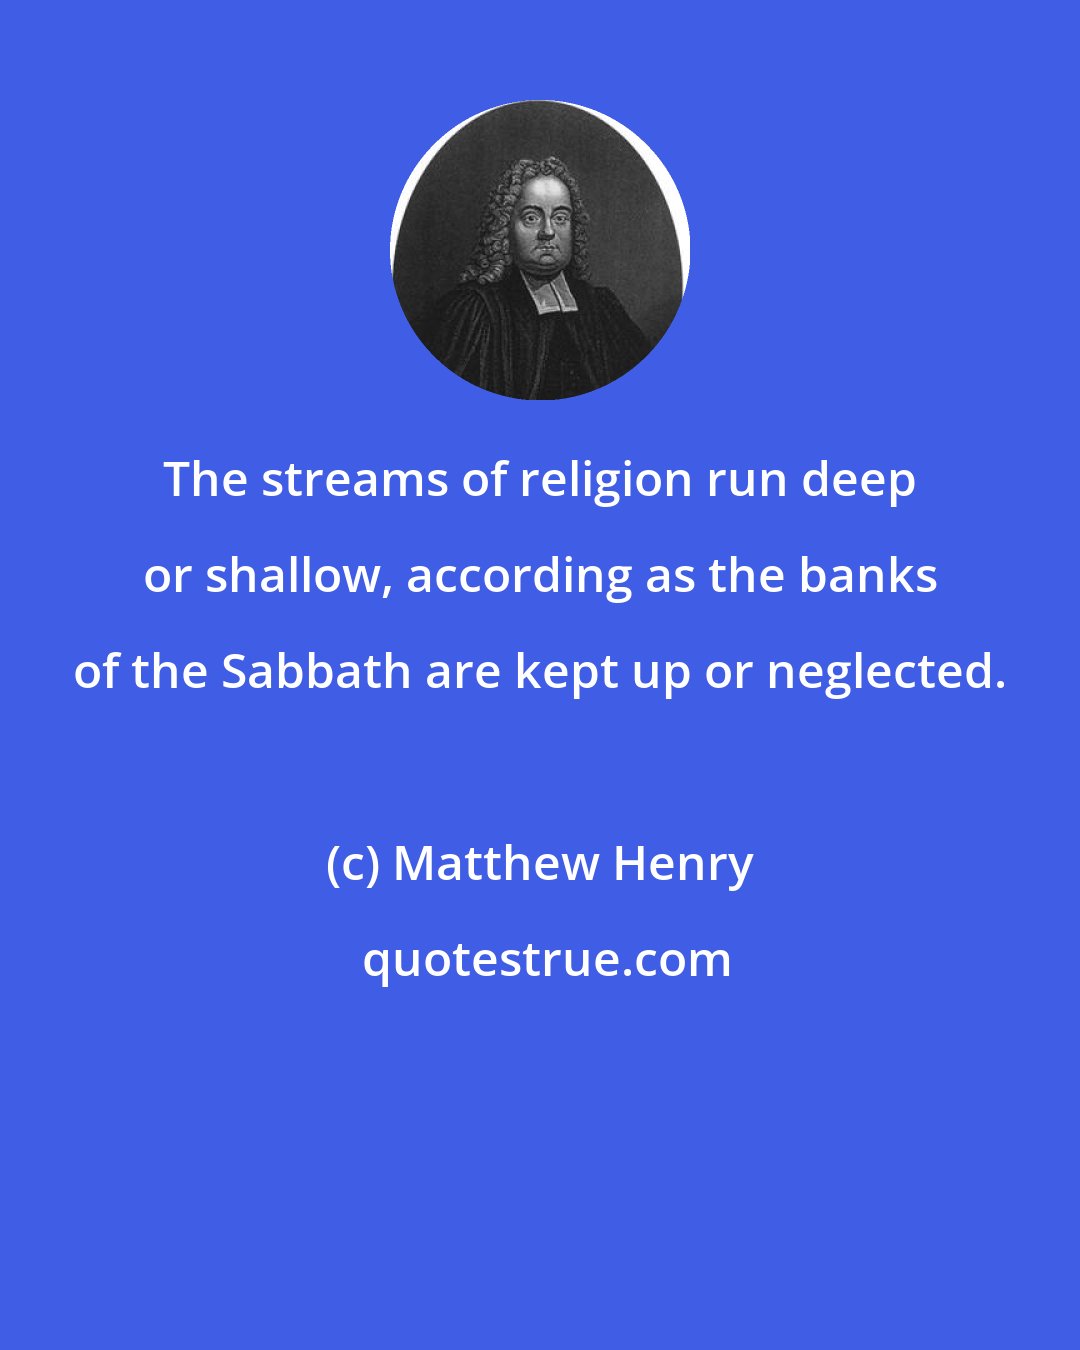 Matthew Henry: The streams of religion run deep or shallow, according as the banks of the Sabbath are kept up or neglected.